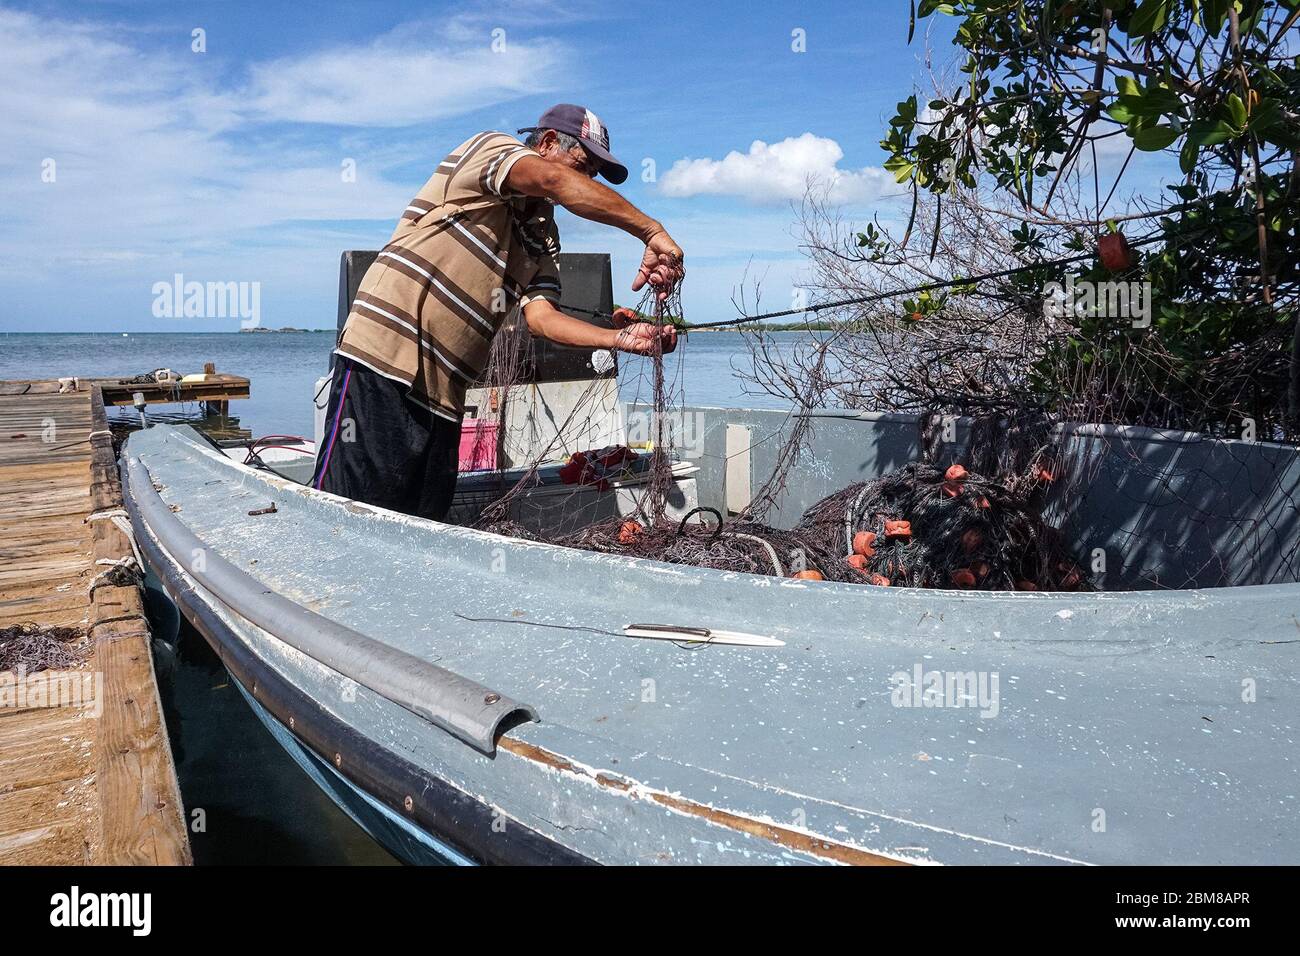 Artisanal fisher Dennis Arroyo Ramírez has fished with a nasa and a net since he was a child. On his boat on a wharf in Cabo Rojo, on Puerto Rico’s southwest coast, he fixes the net after a shark broke part of it. (Coraly Cruz Mejías, GPJ Puerto Rico) Stock Photo